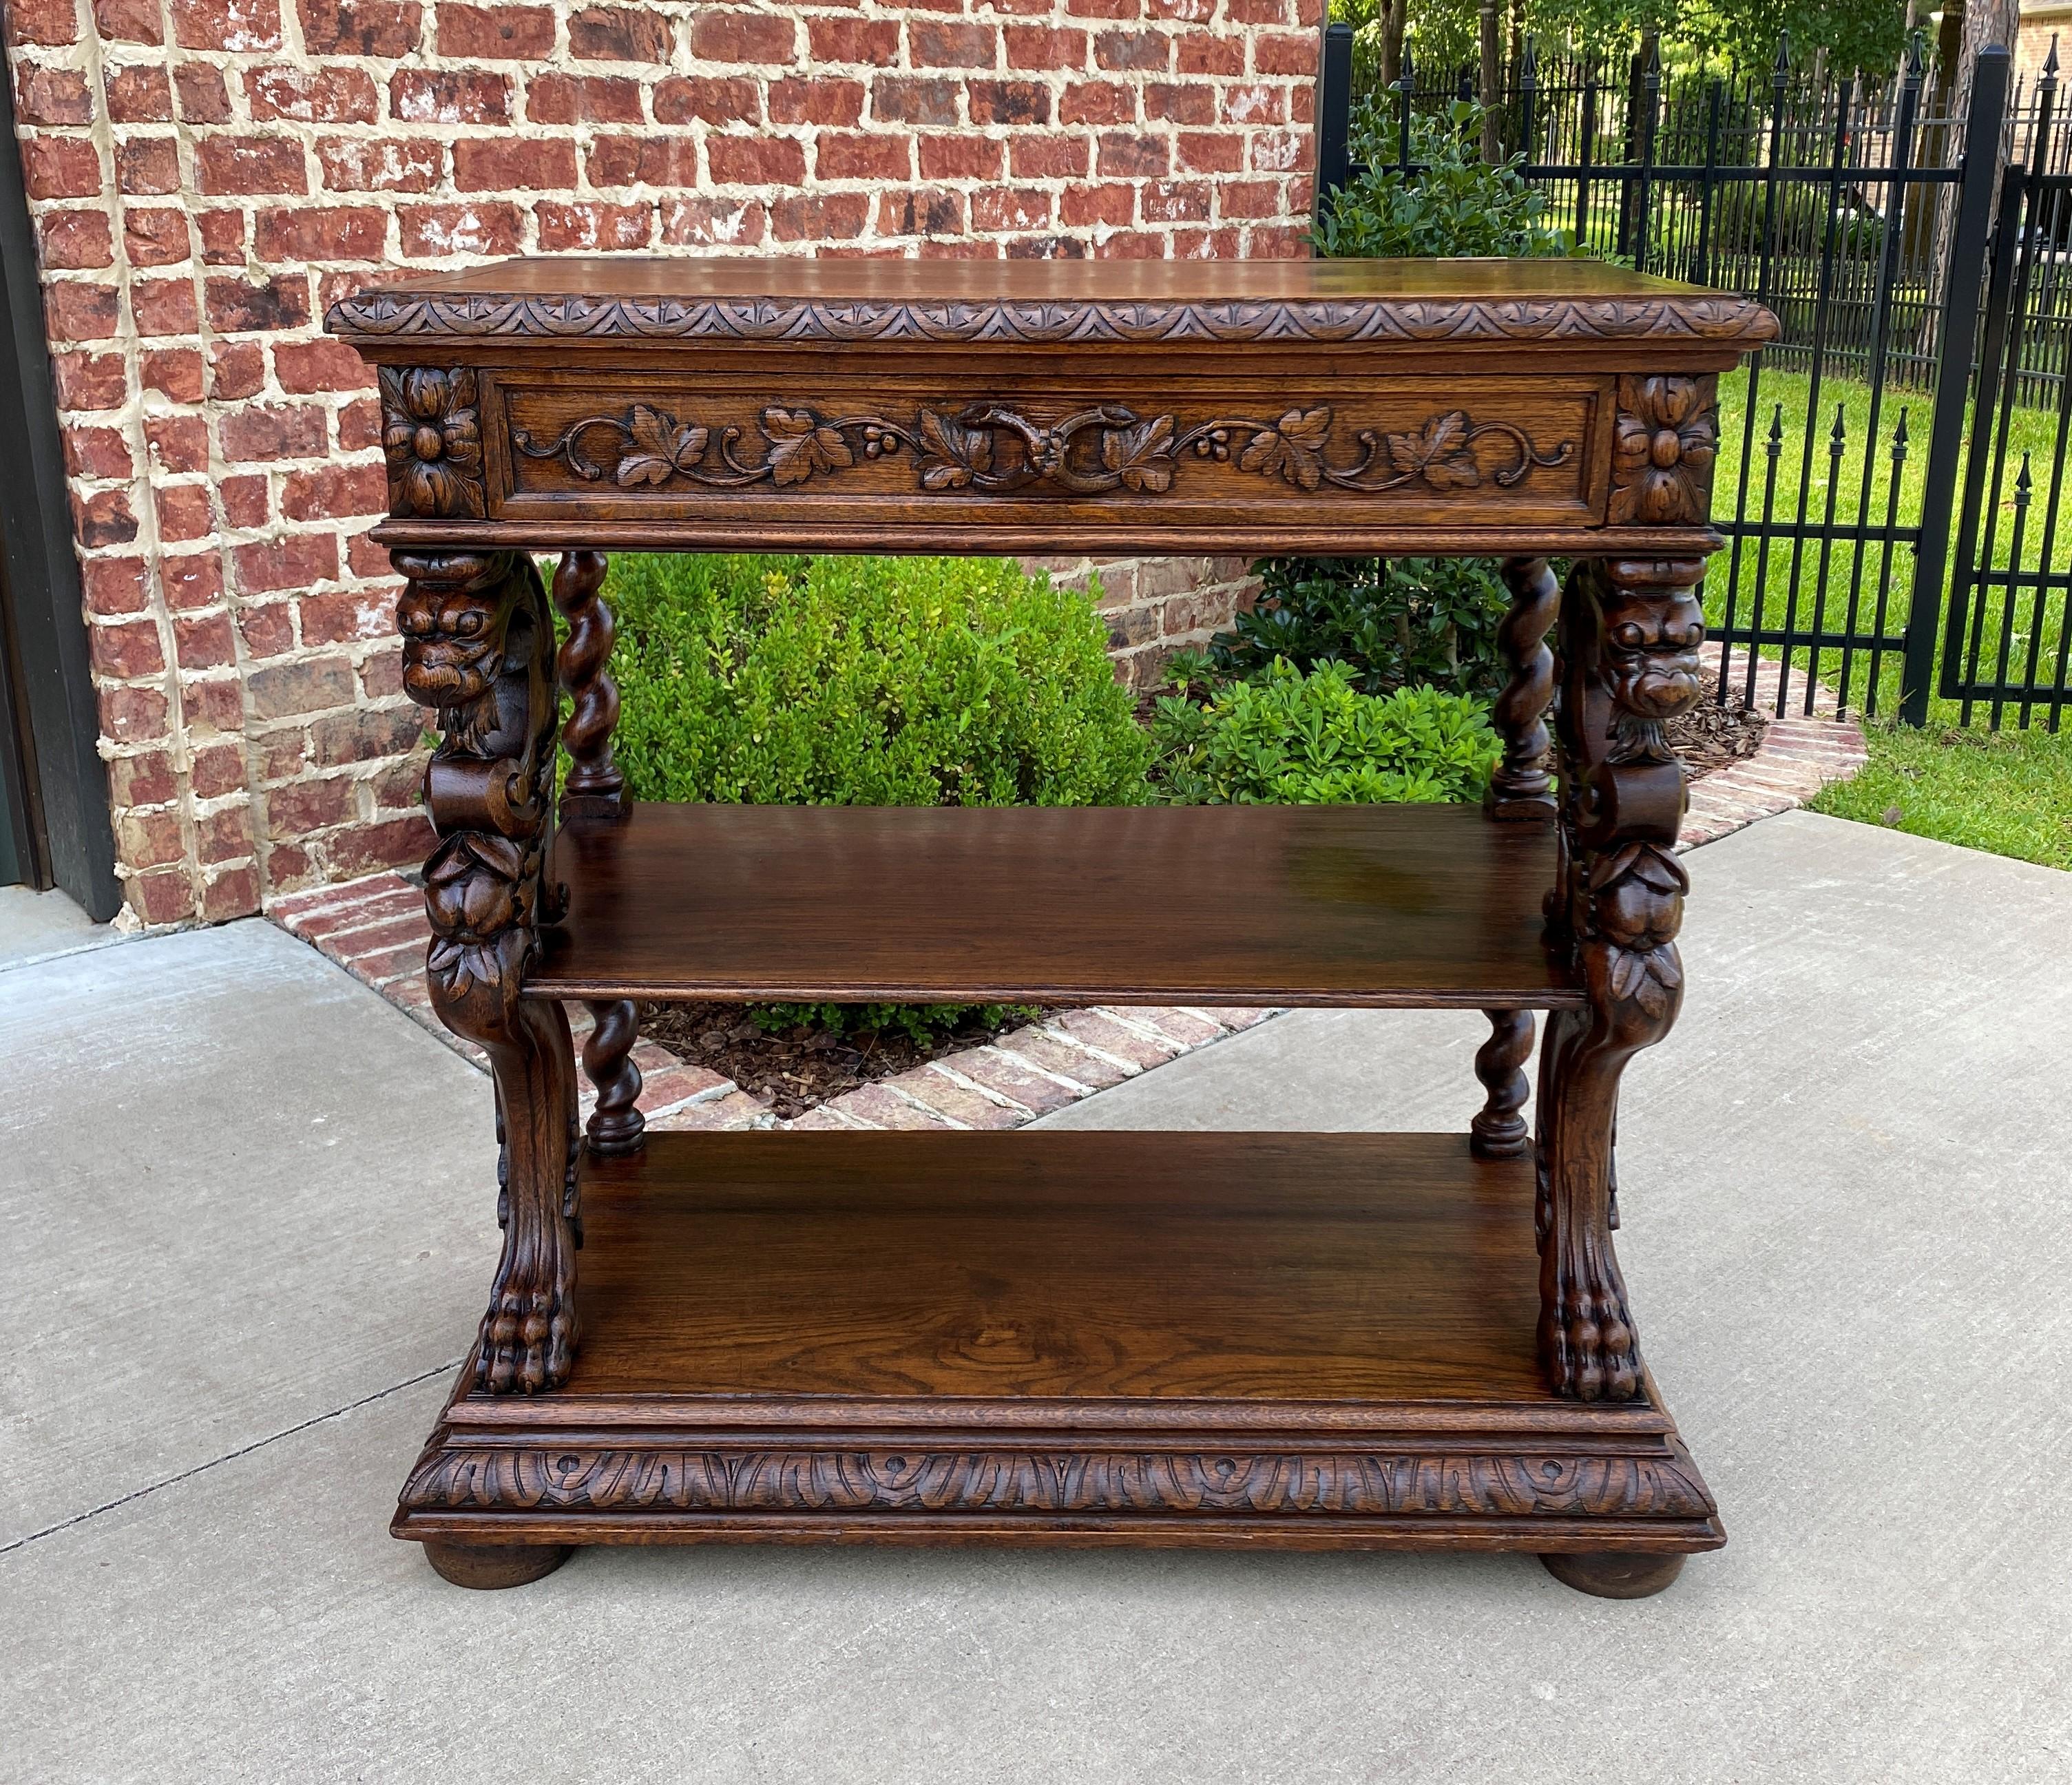 Charming and versatile antique French oak server, sideboard or buffet~~Renaissance Revival~~lift top marble~~c. 1880s

Relief -carved beveled edge top lifts to reveal original gray marble with nice veining~~Unique combination of carved bearded